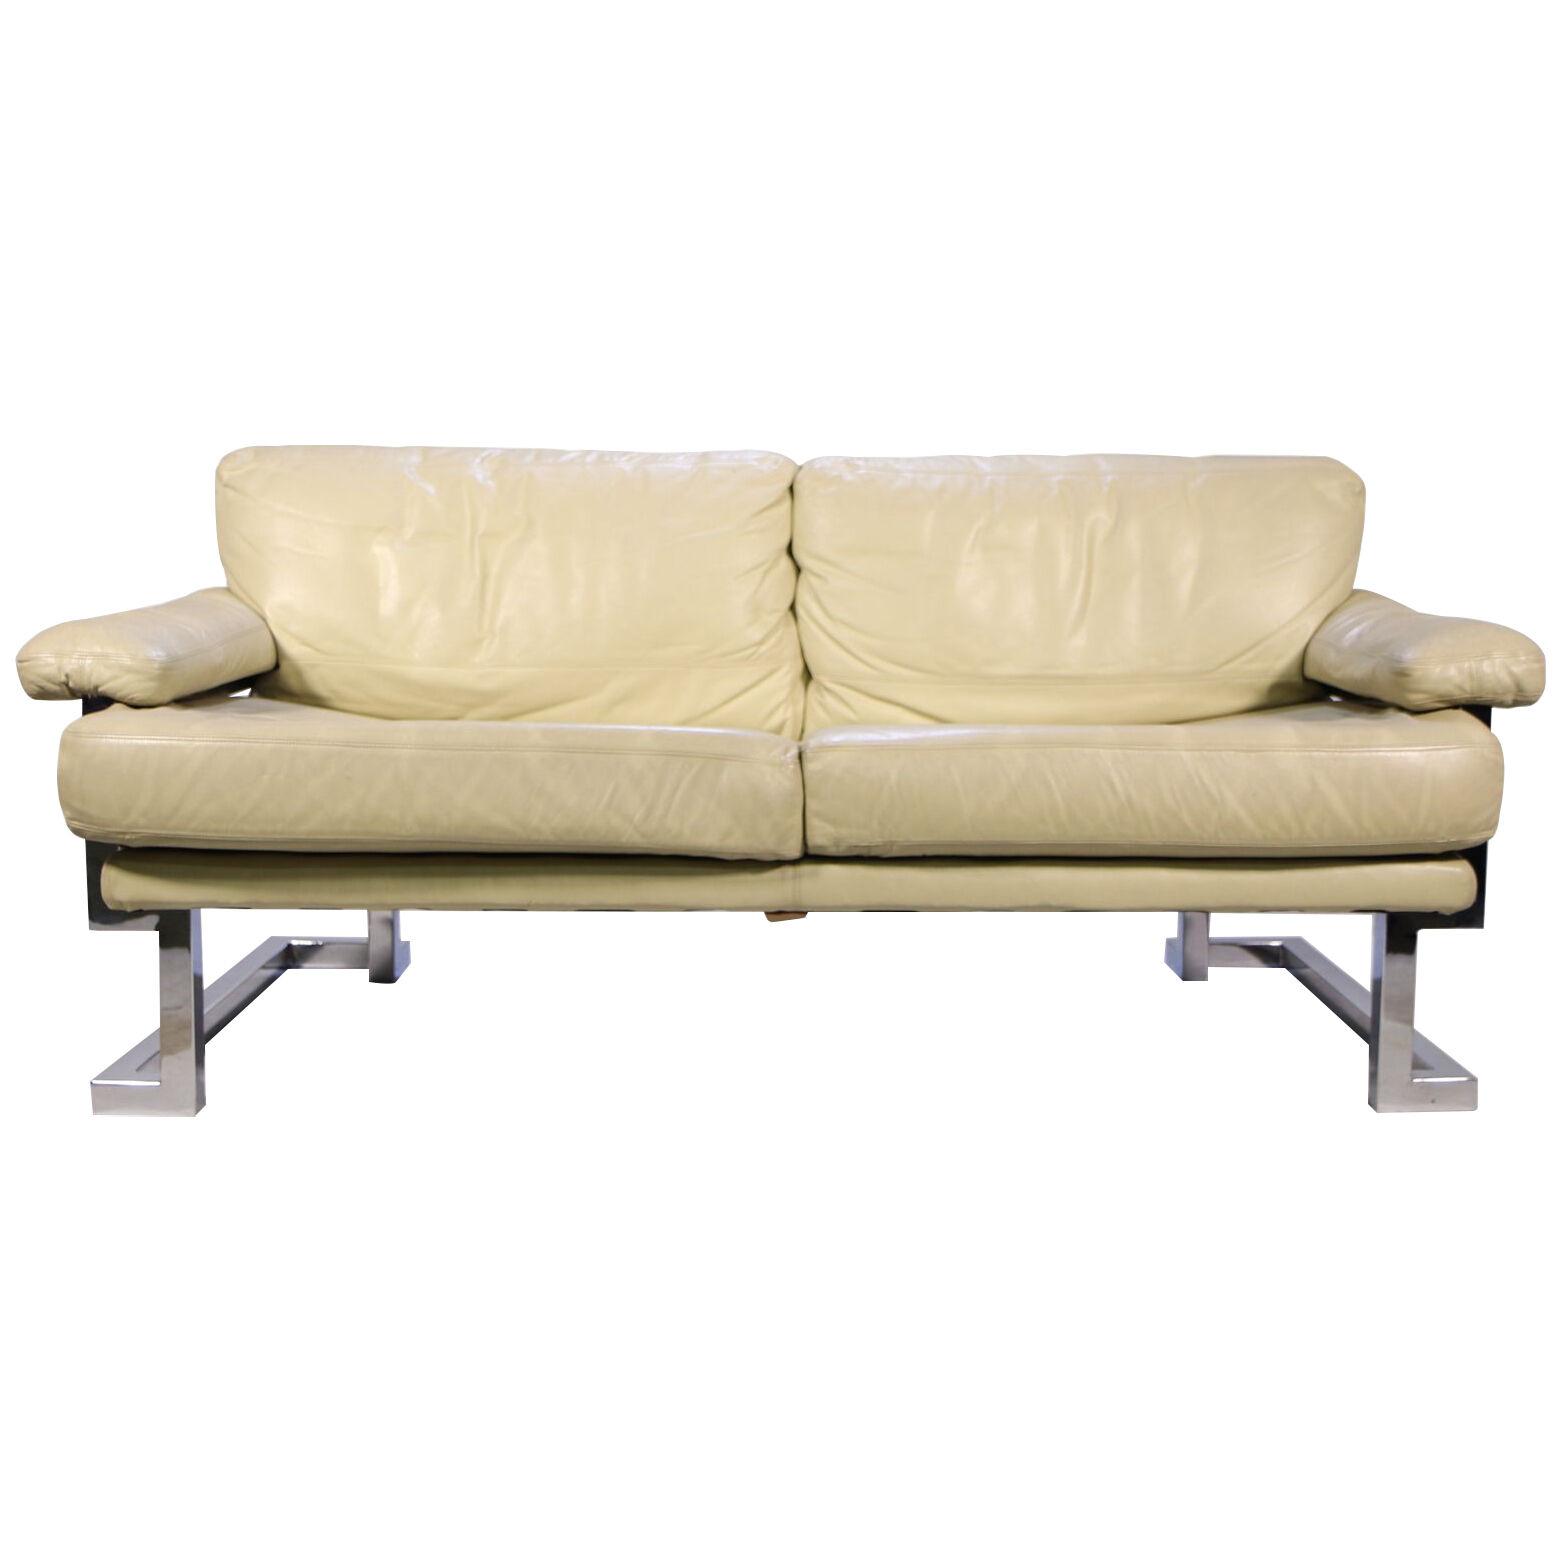 Pieff Mandarin two seat sofa in cream Leather and Chrome